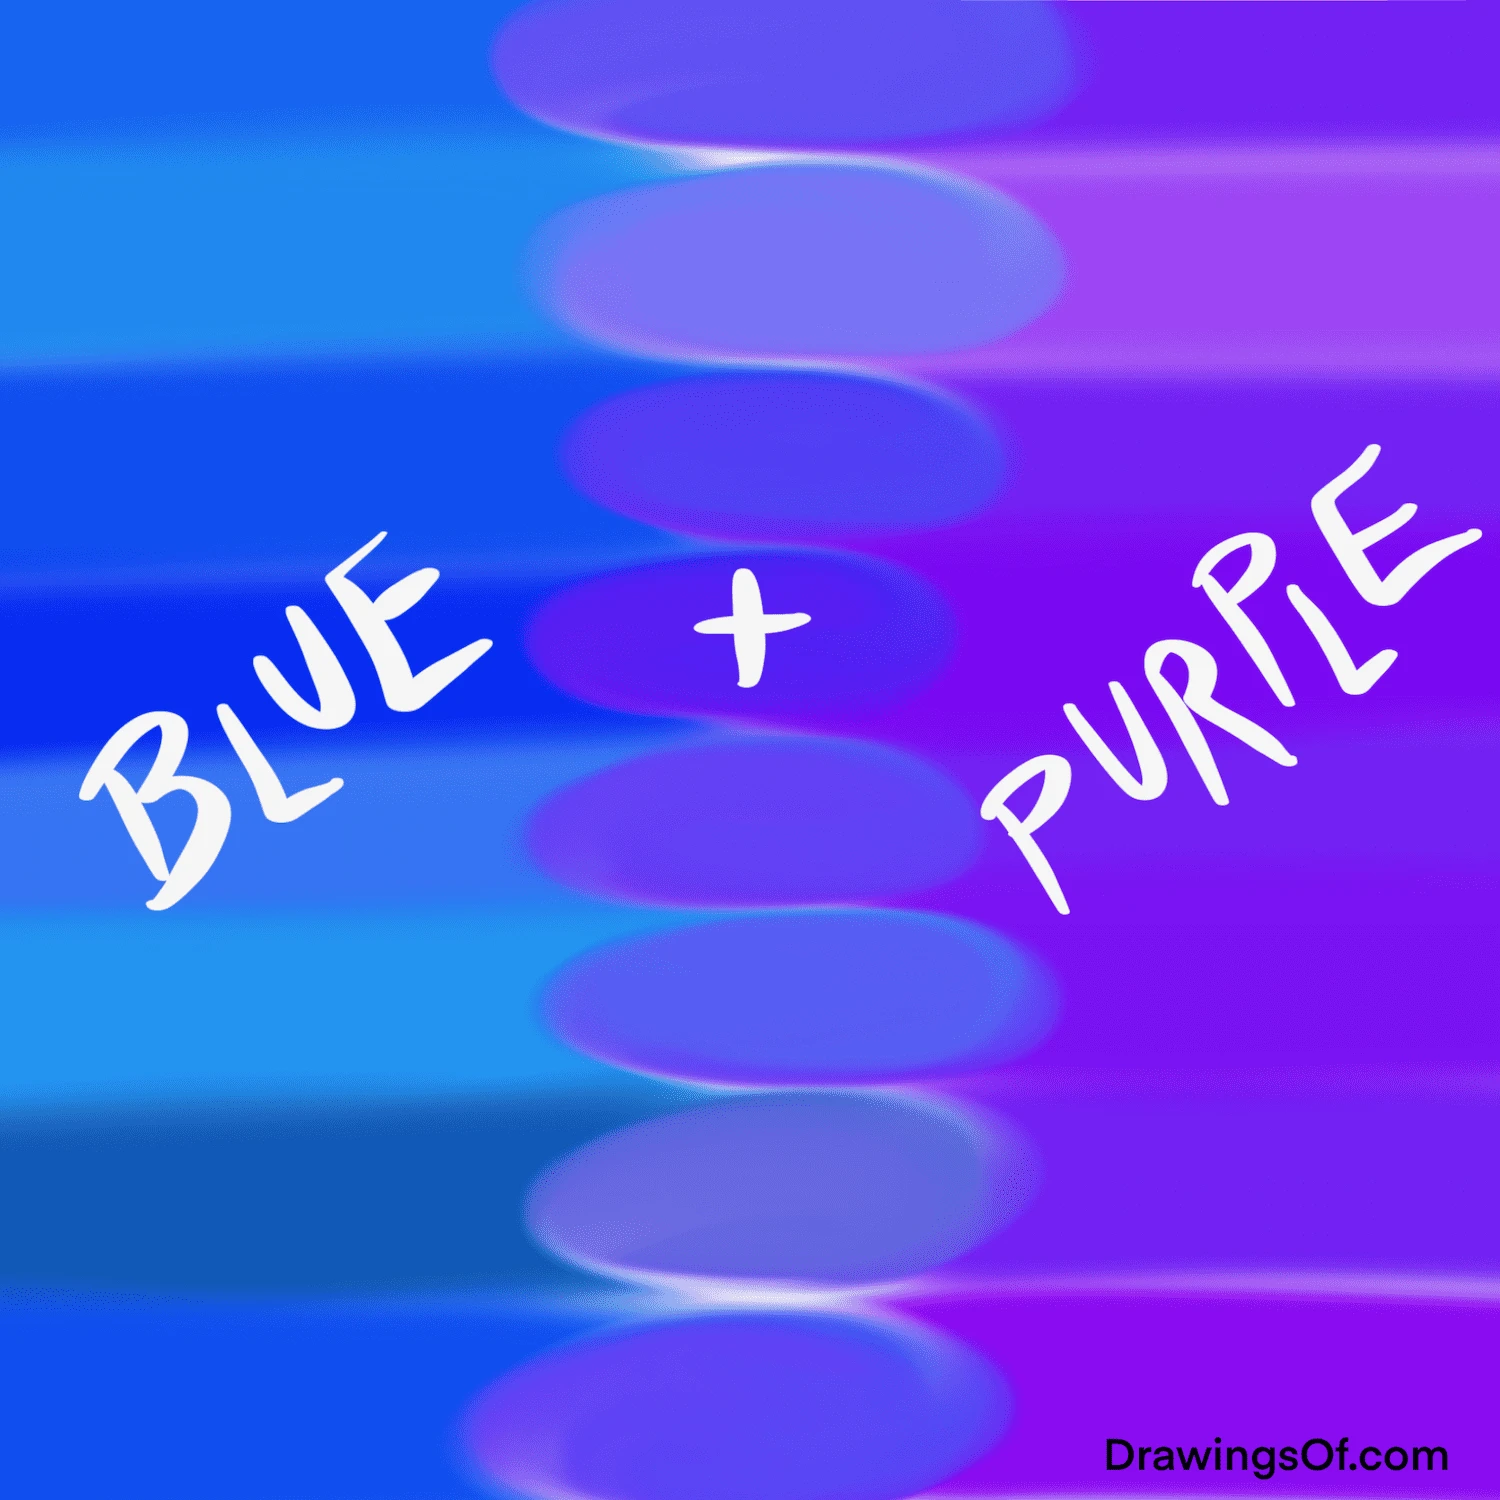 What color does purple and blue make?